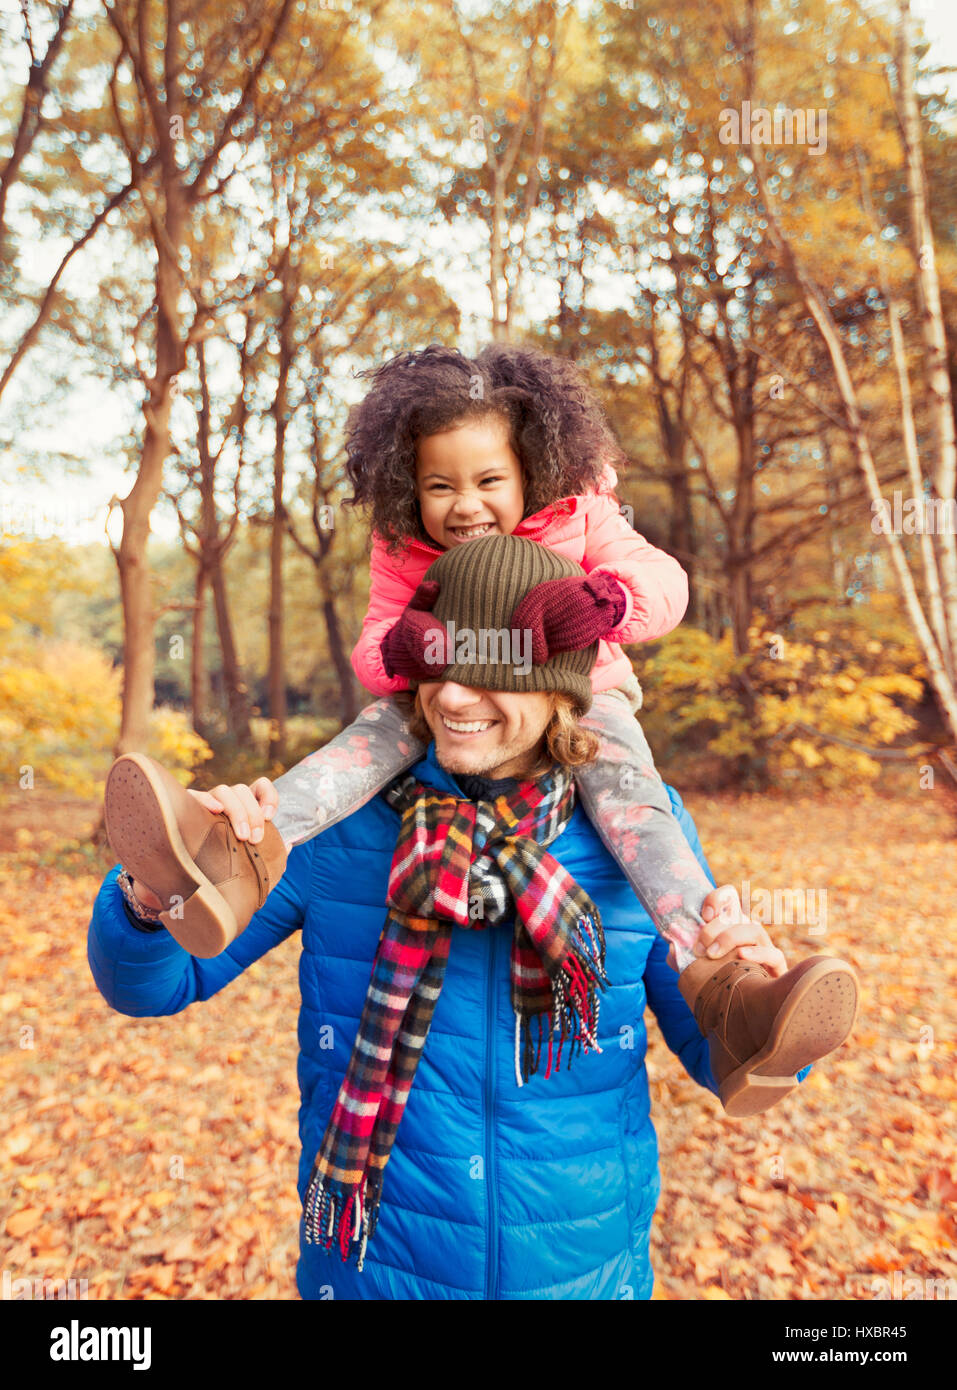 Portrait playful daughter pulling stocking cap over fathers eyes in autumn park Stock Photo